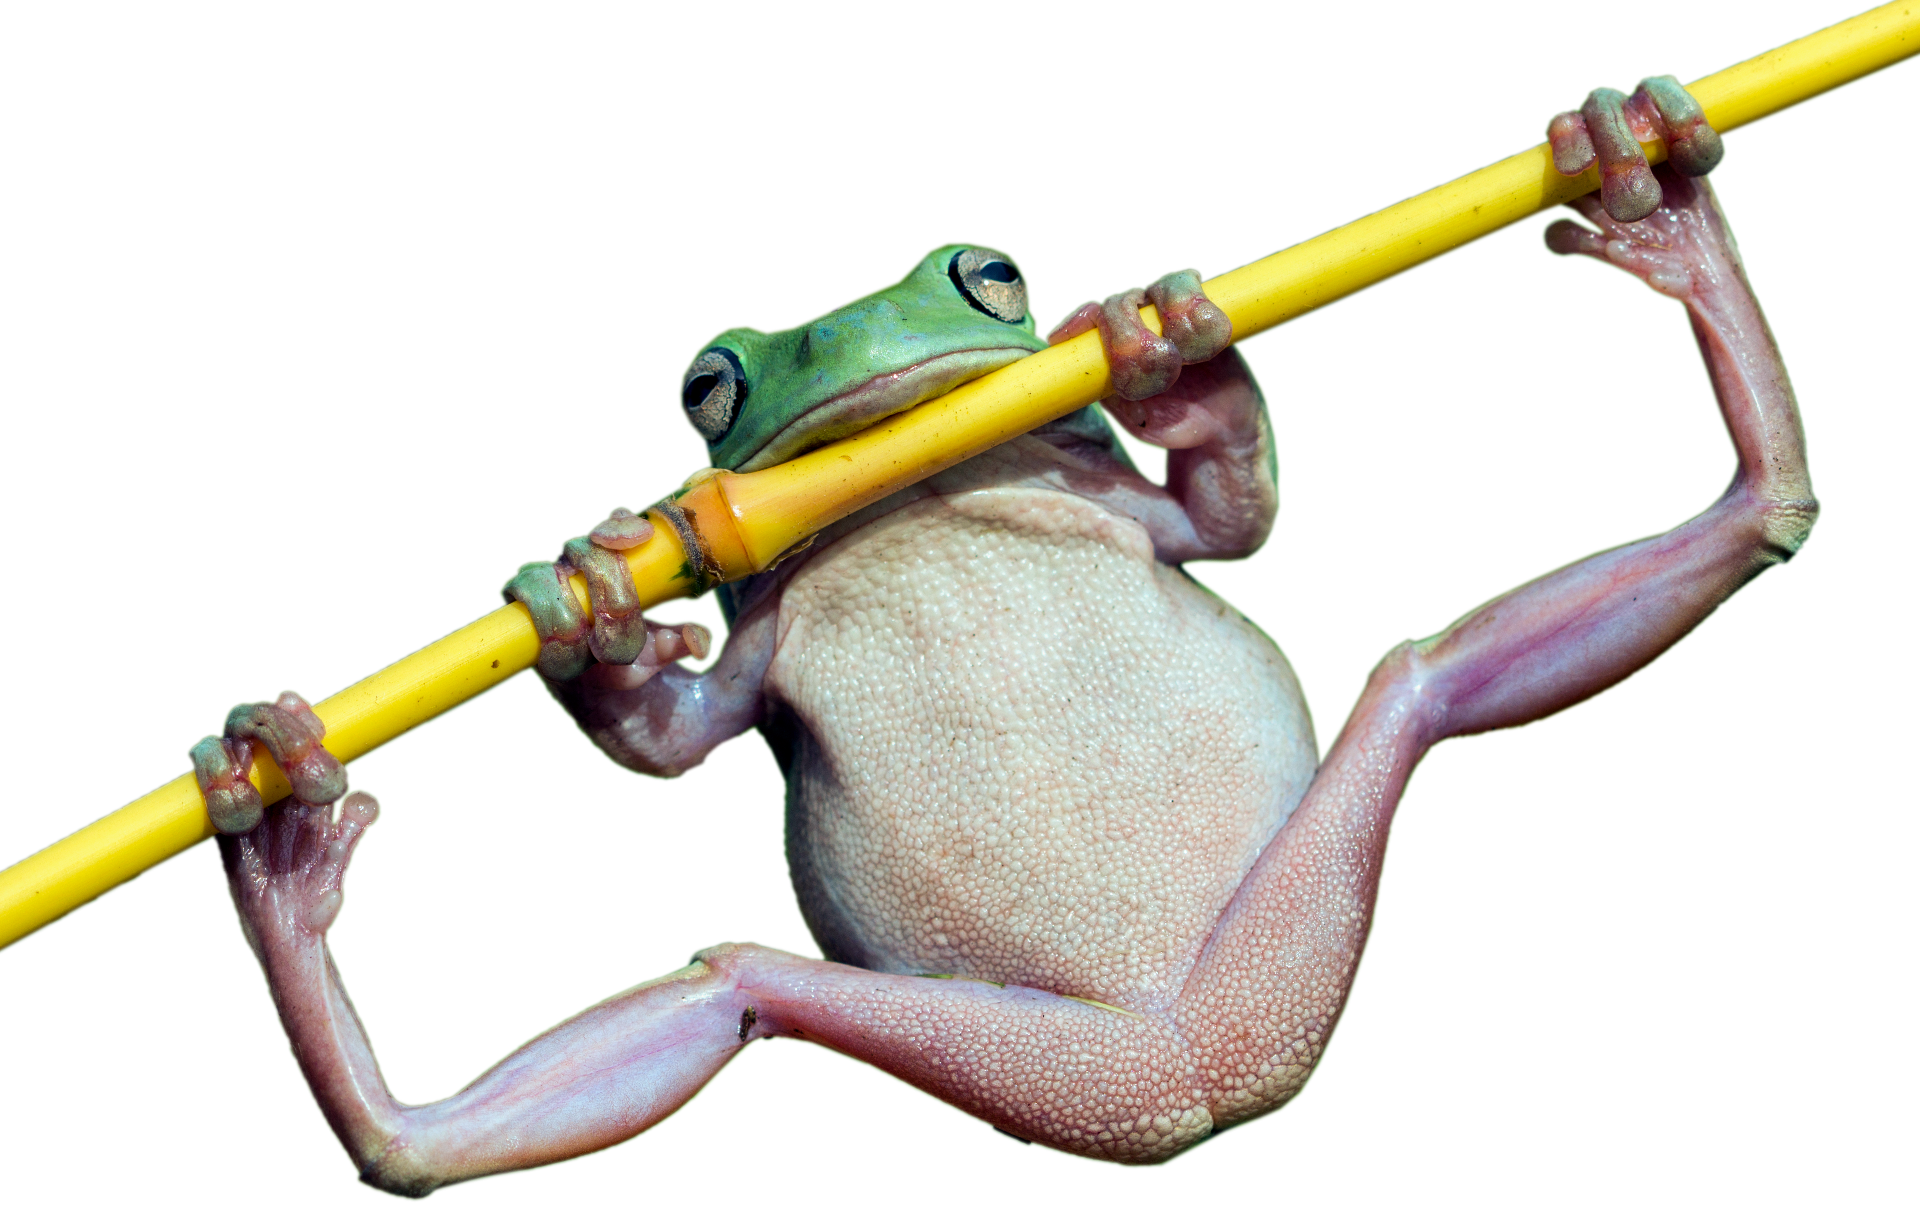 a frog is hanging from a yellow pole